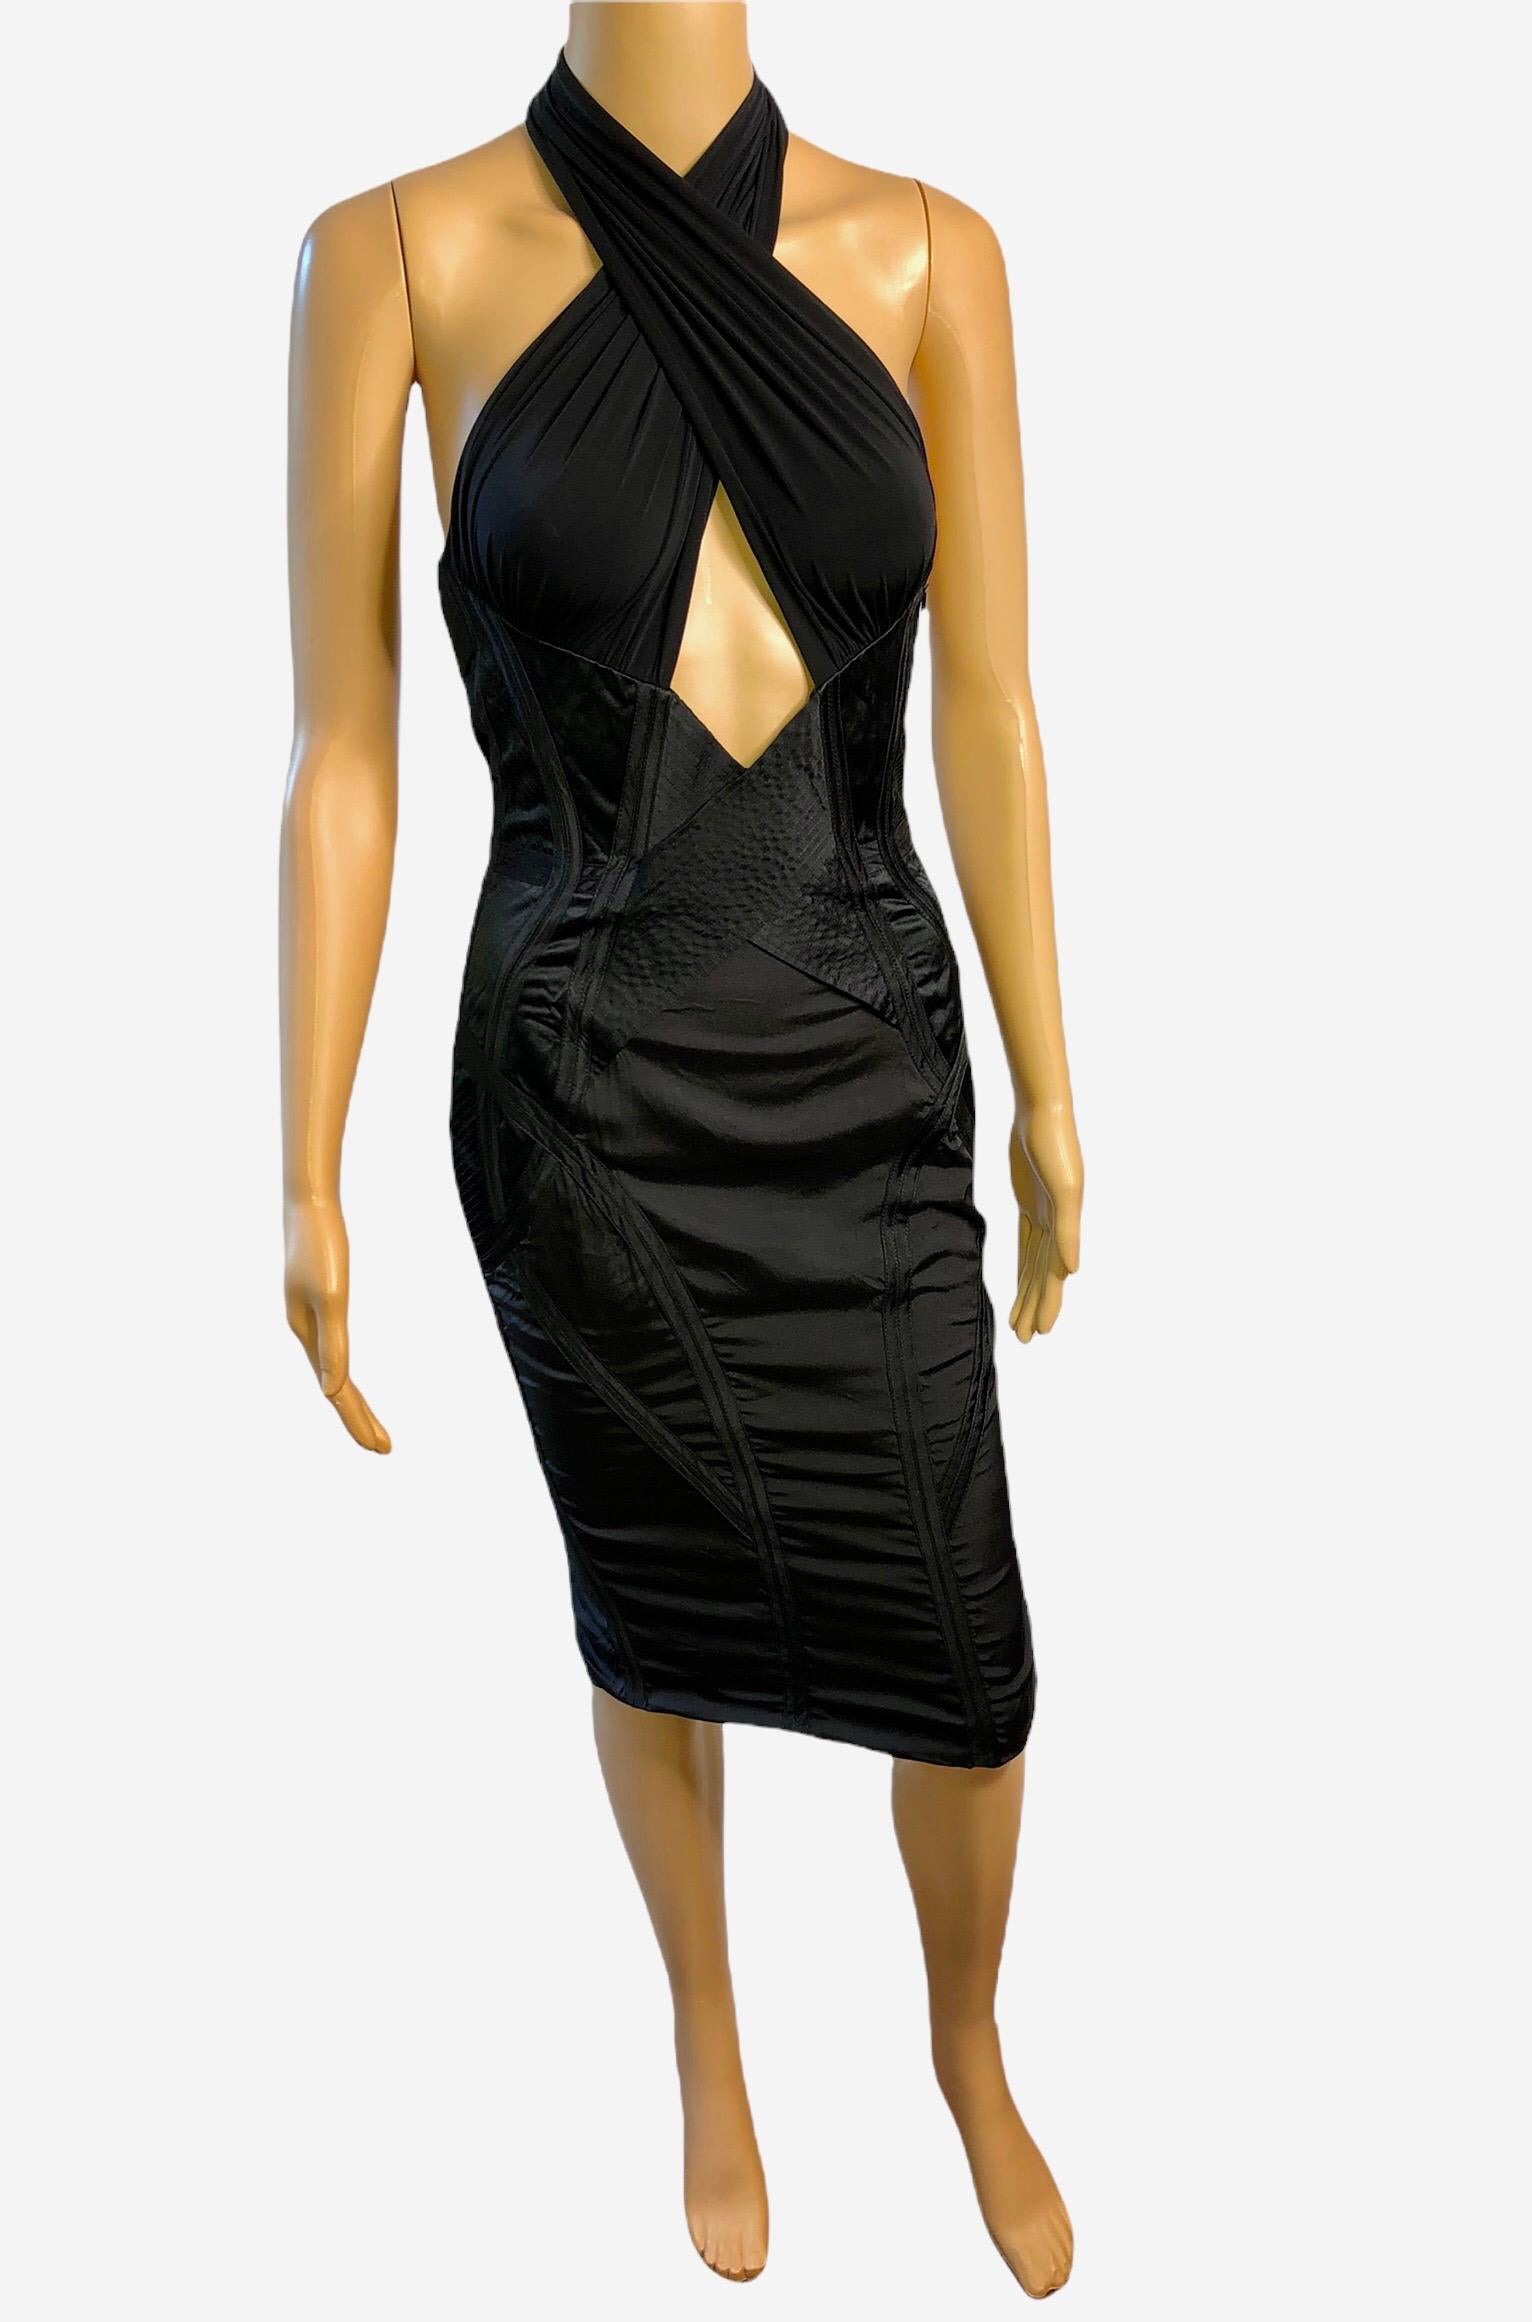 Tom Ford for Gucci F/W 2003 Runway Cutout Silk Black Dress IT 38

Look 35 from the Fall 2003 Collection.

